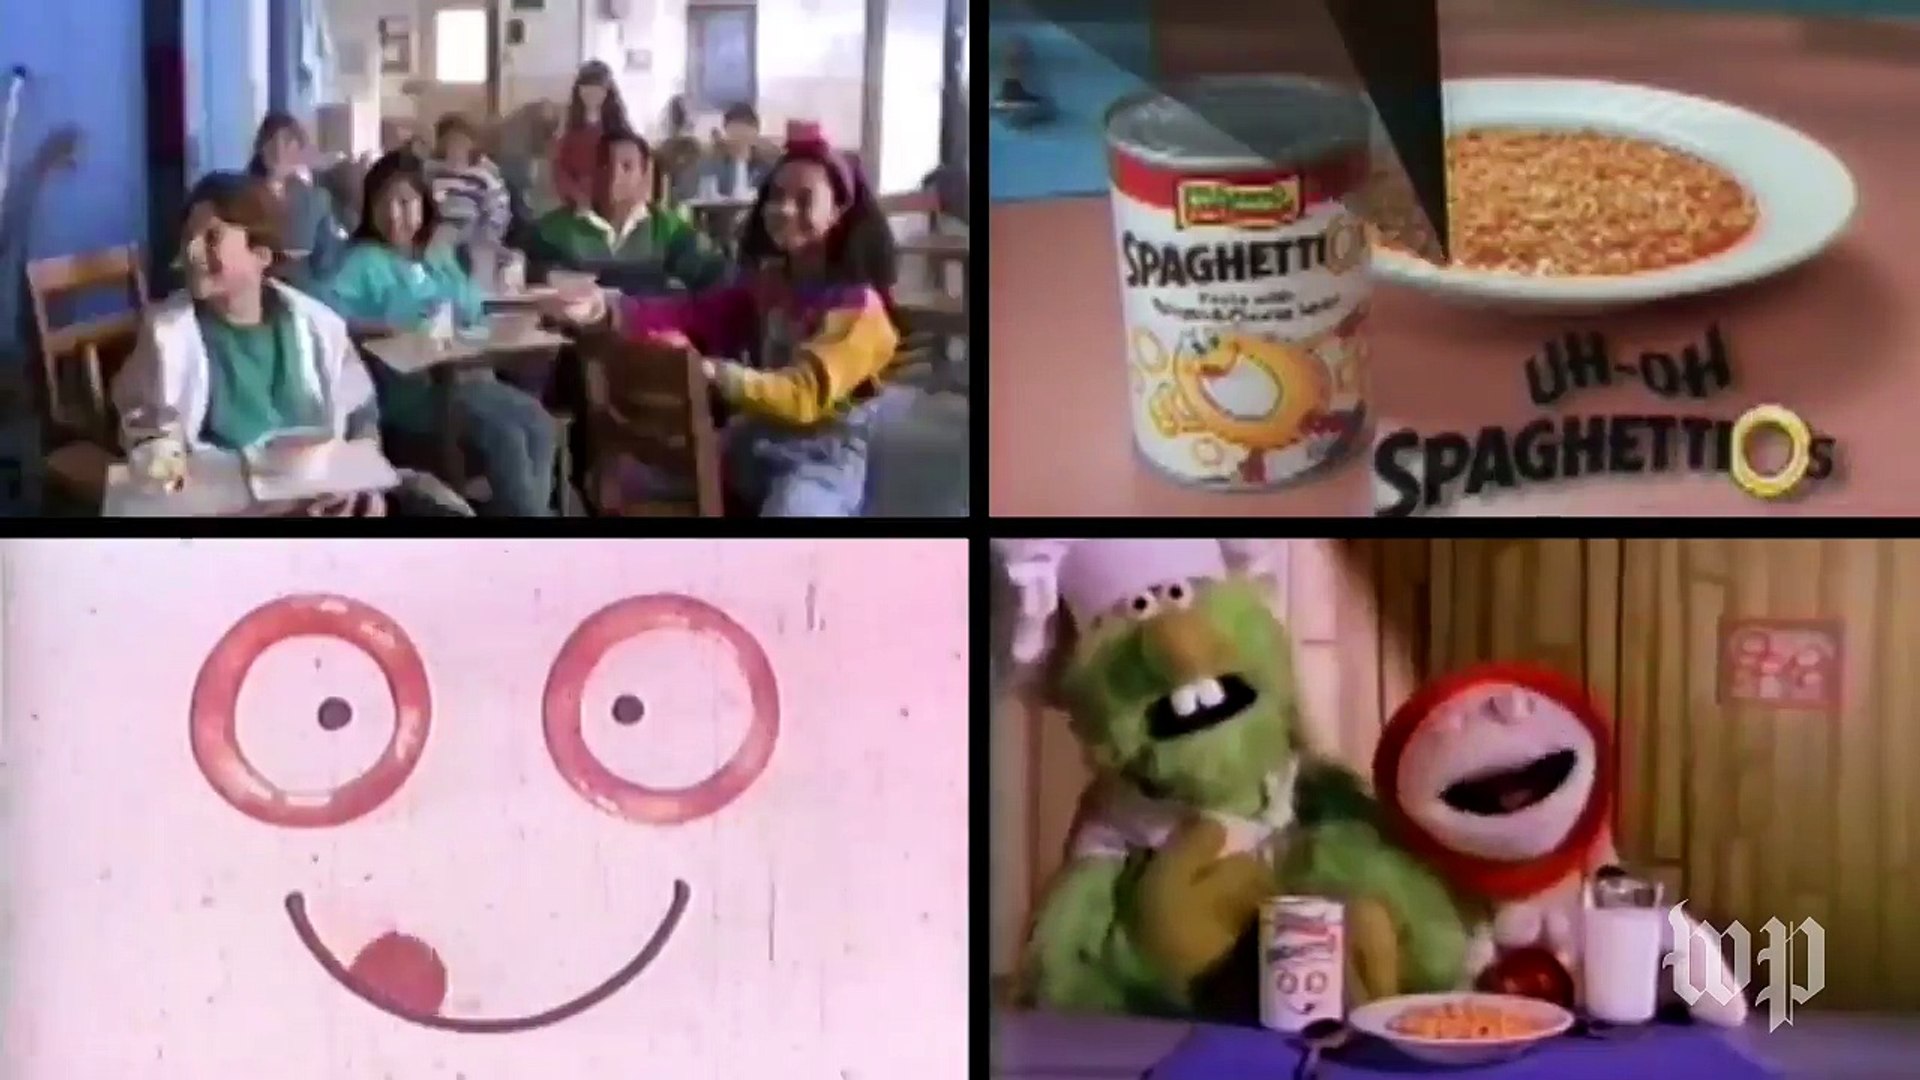 Uh-oh SpaghettiOs: The catchy commercials through the years - video  Dailymotion